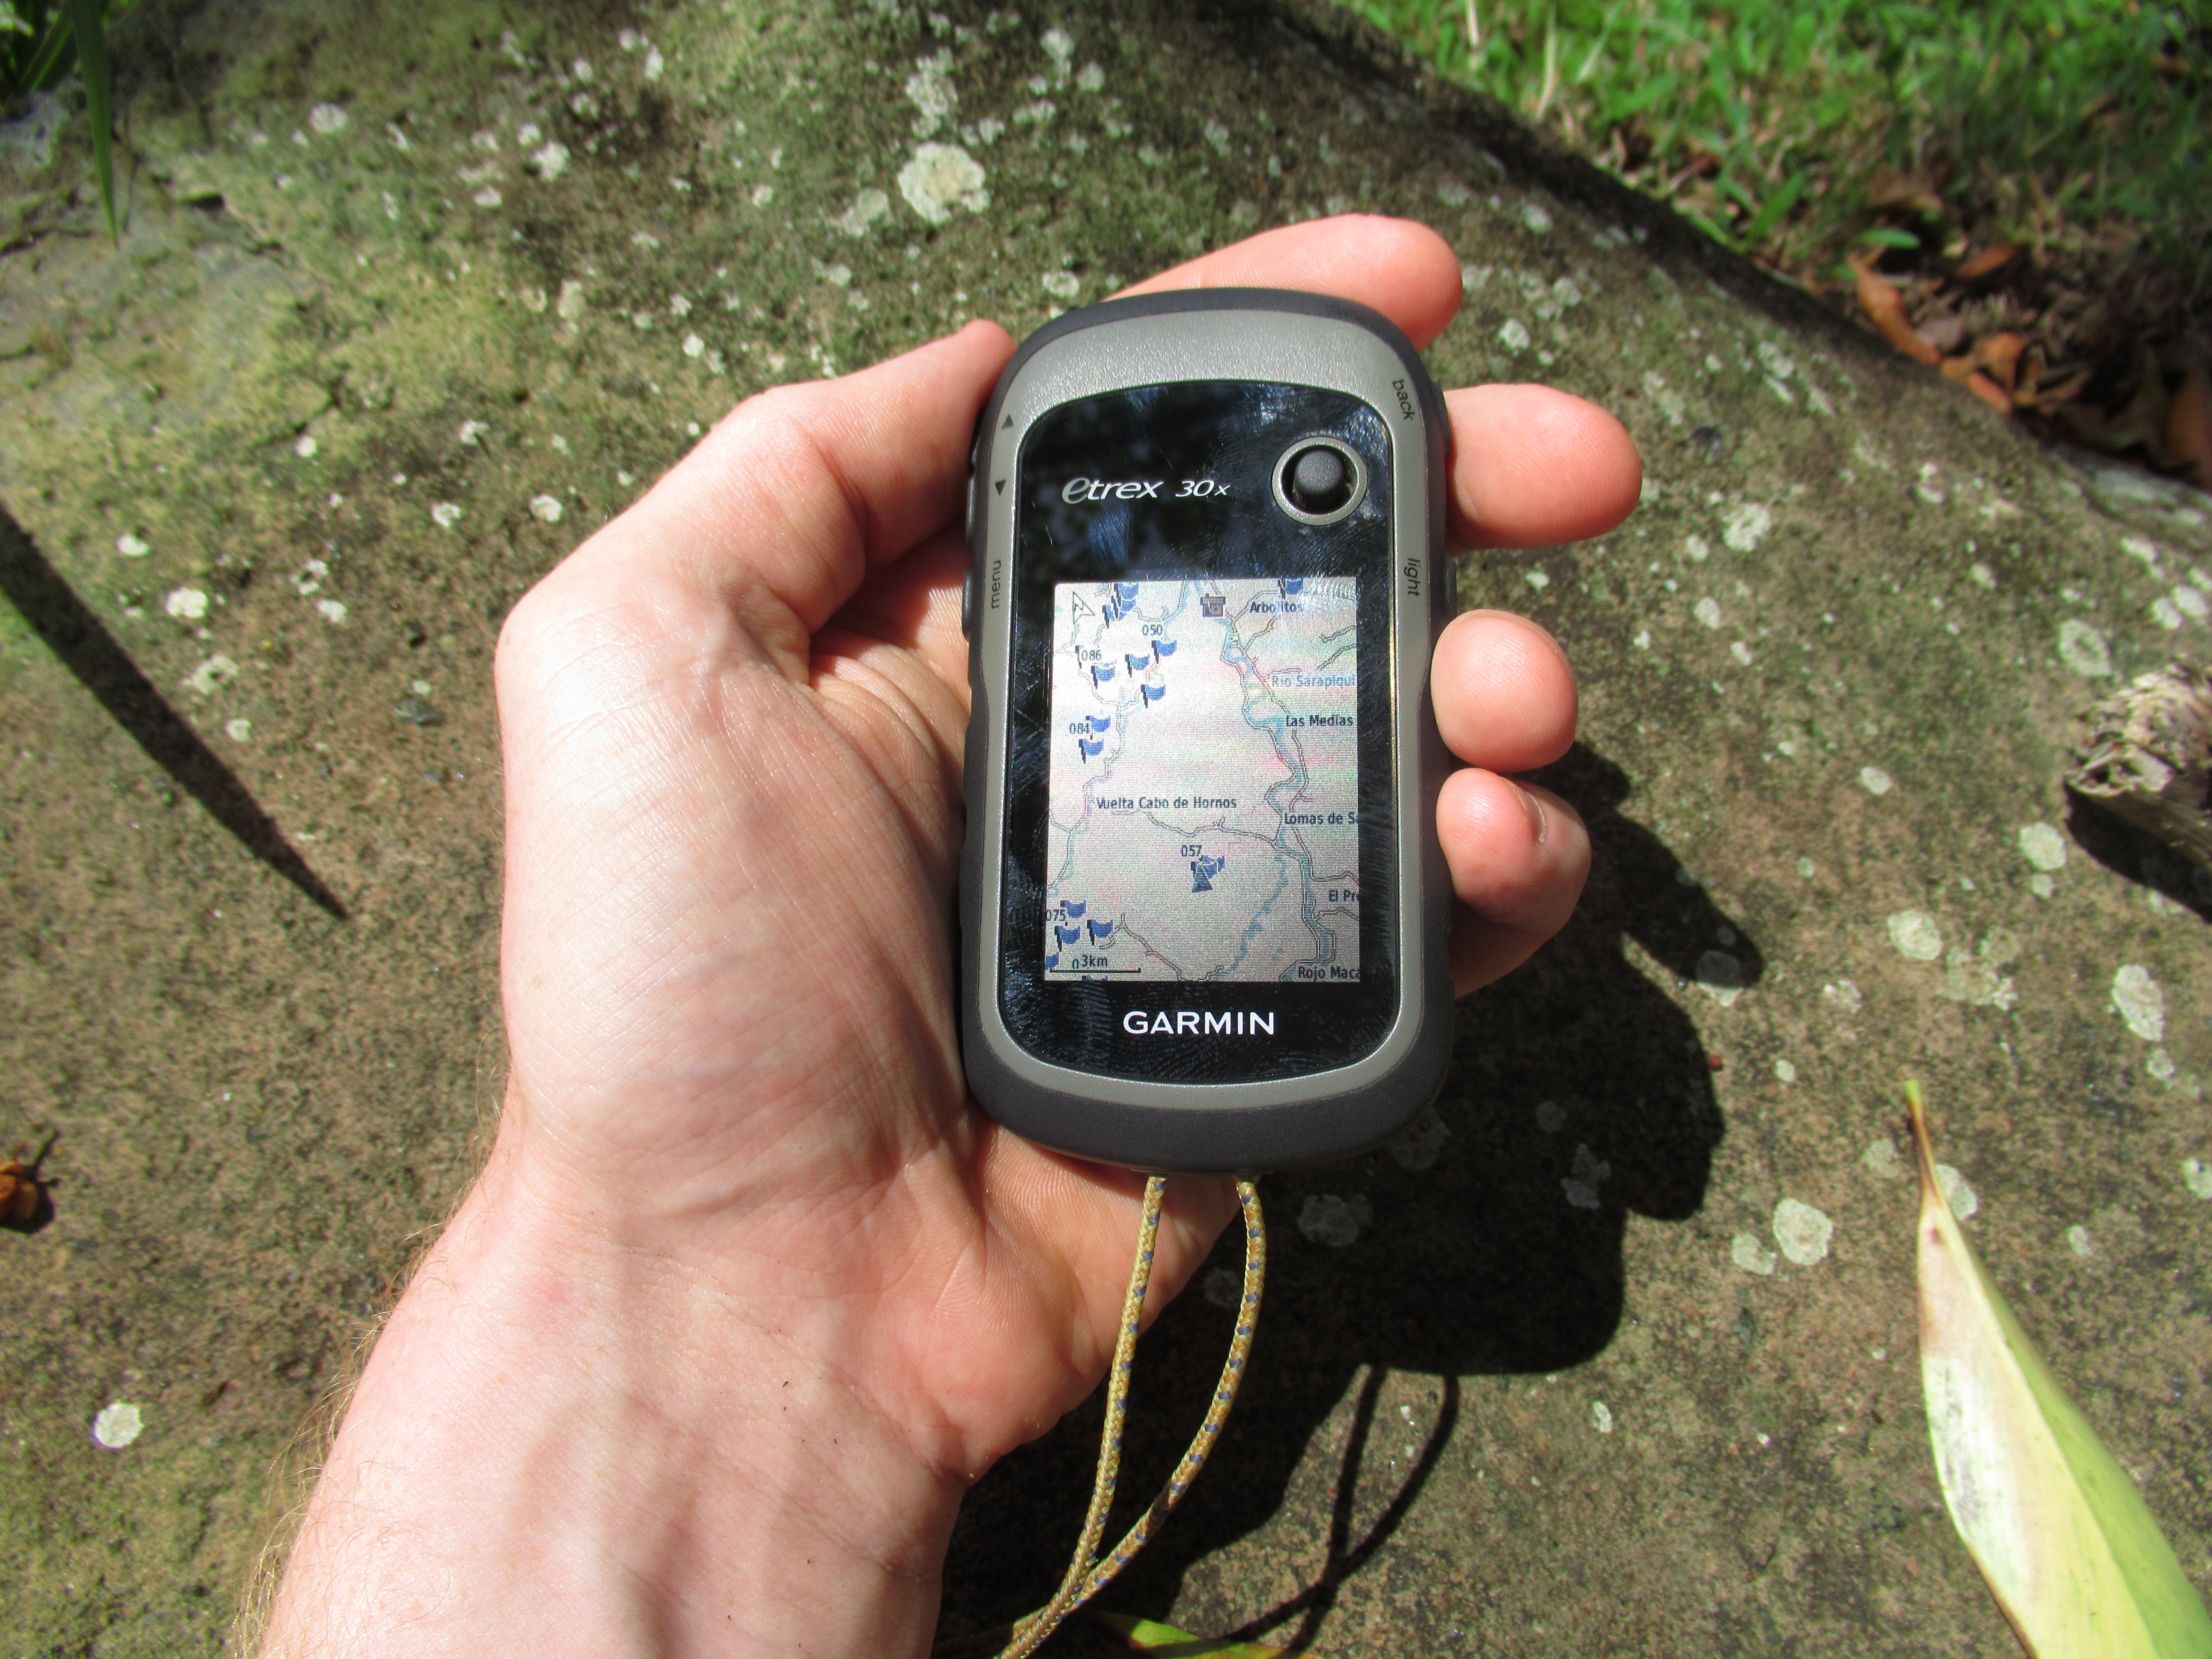 How to] Install Maps for on a Gamin etrex GPS Unit The Biologist